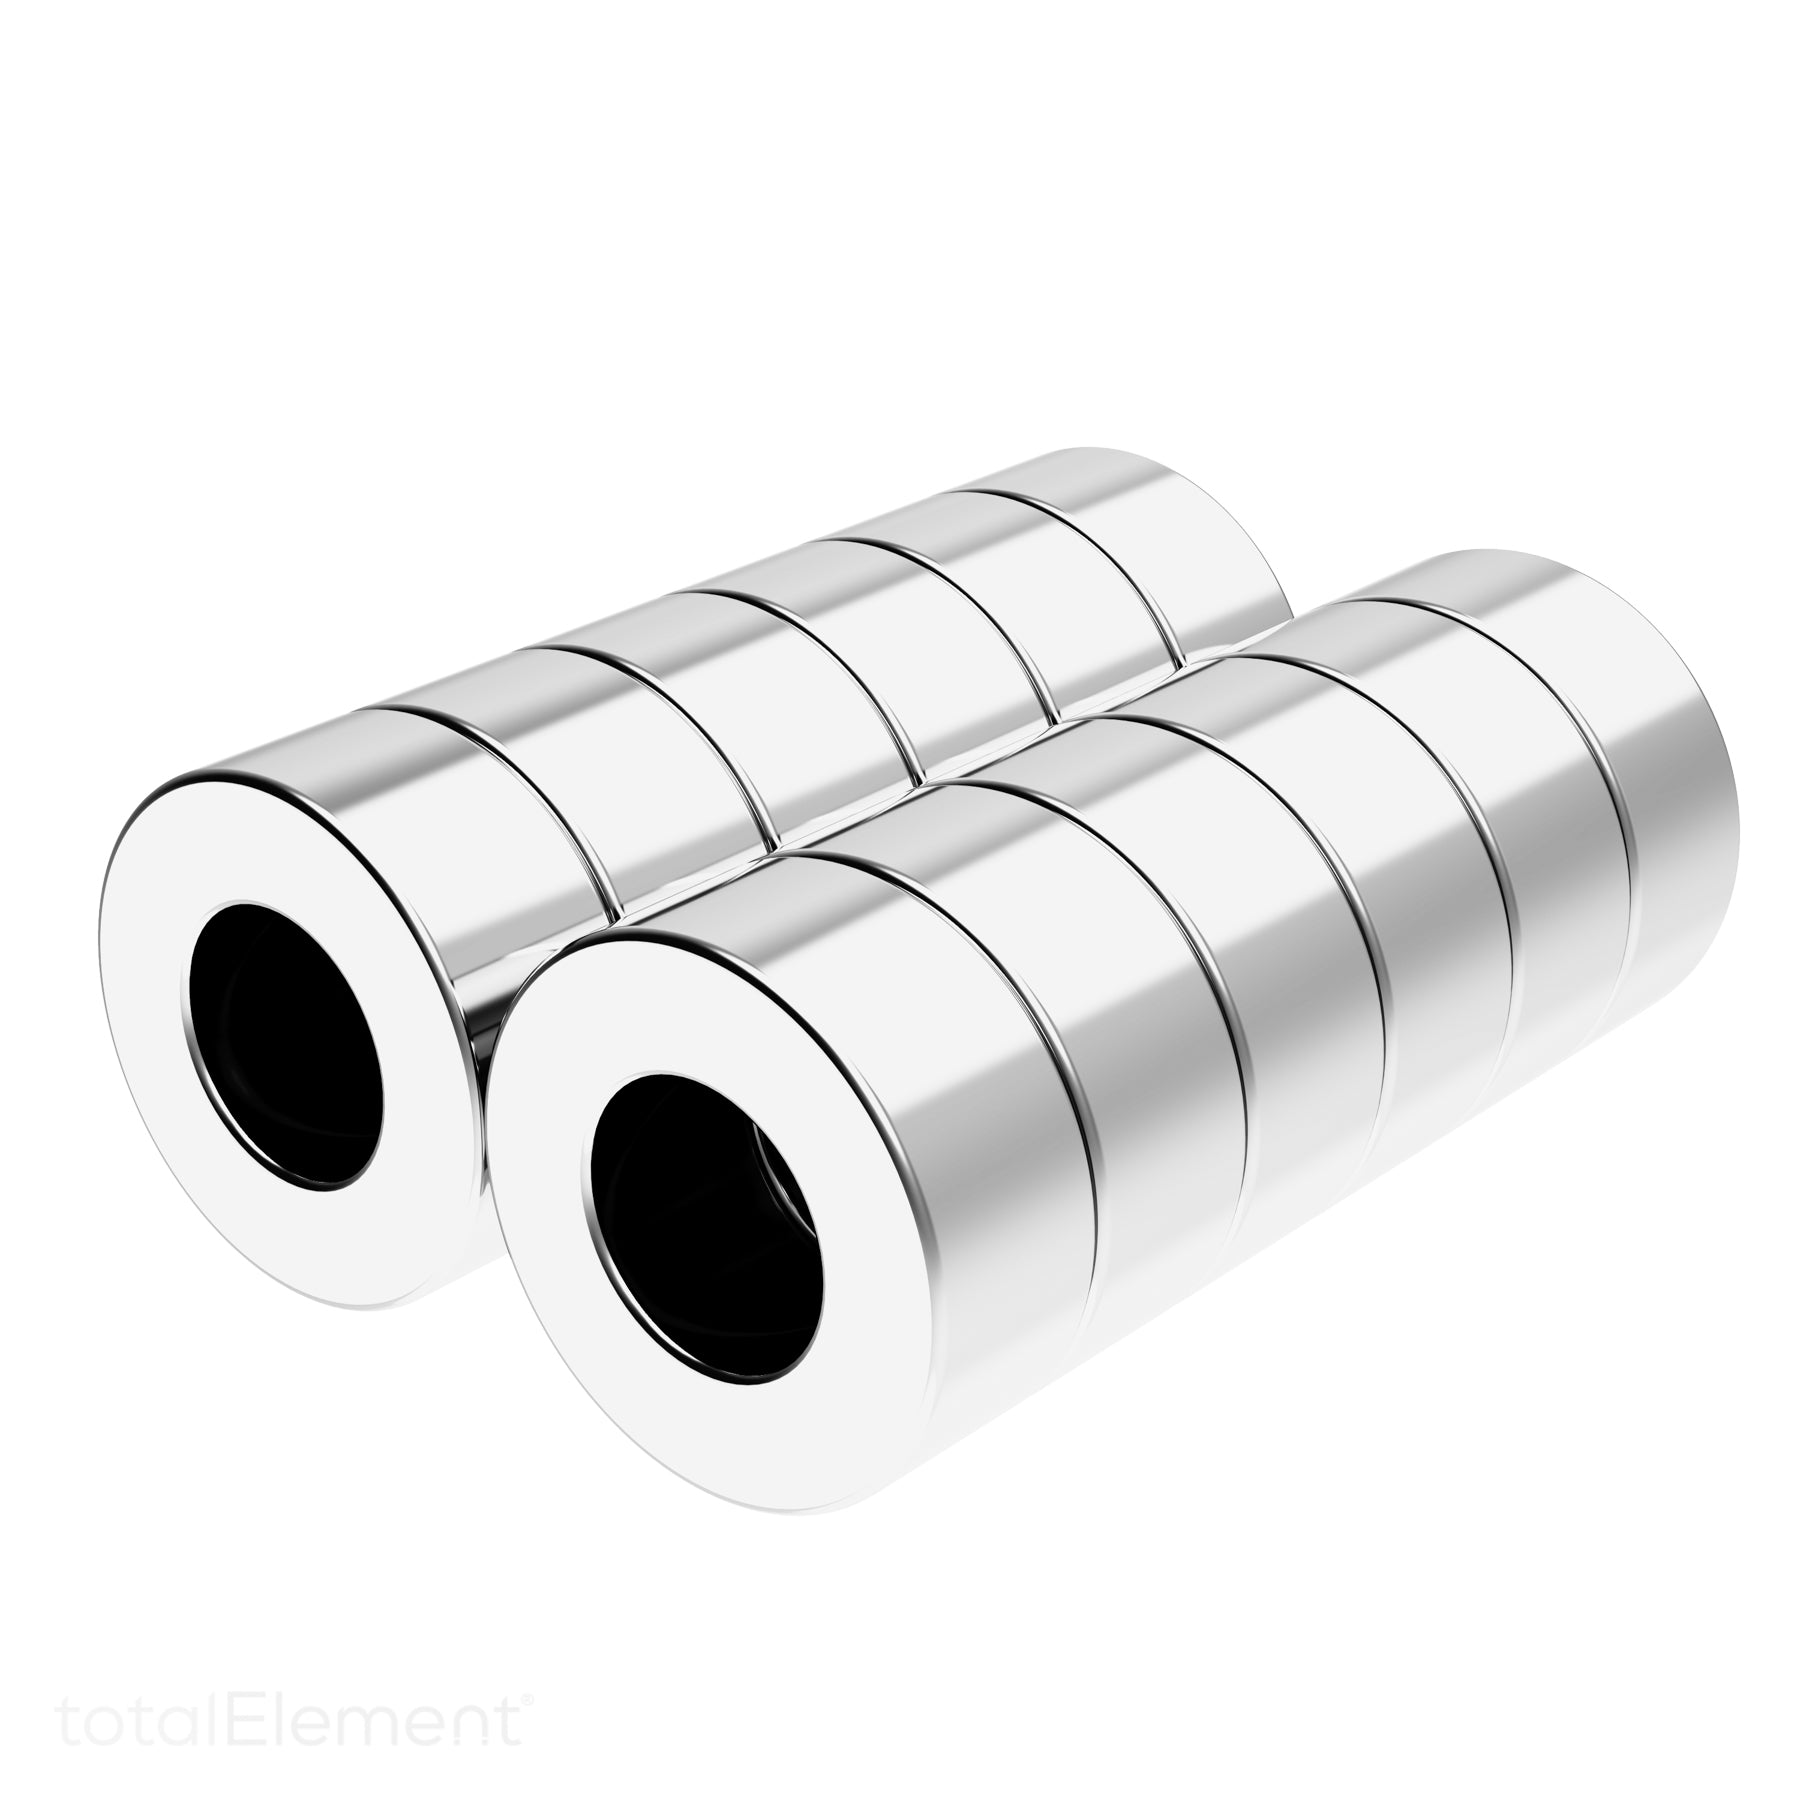 N35 Neodymium magnet countersunk ring : 12mm OD x 8mm large ID x 4mm small  ID x 4mm T - Supreme Magnets — The Quaint Magnet Shop